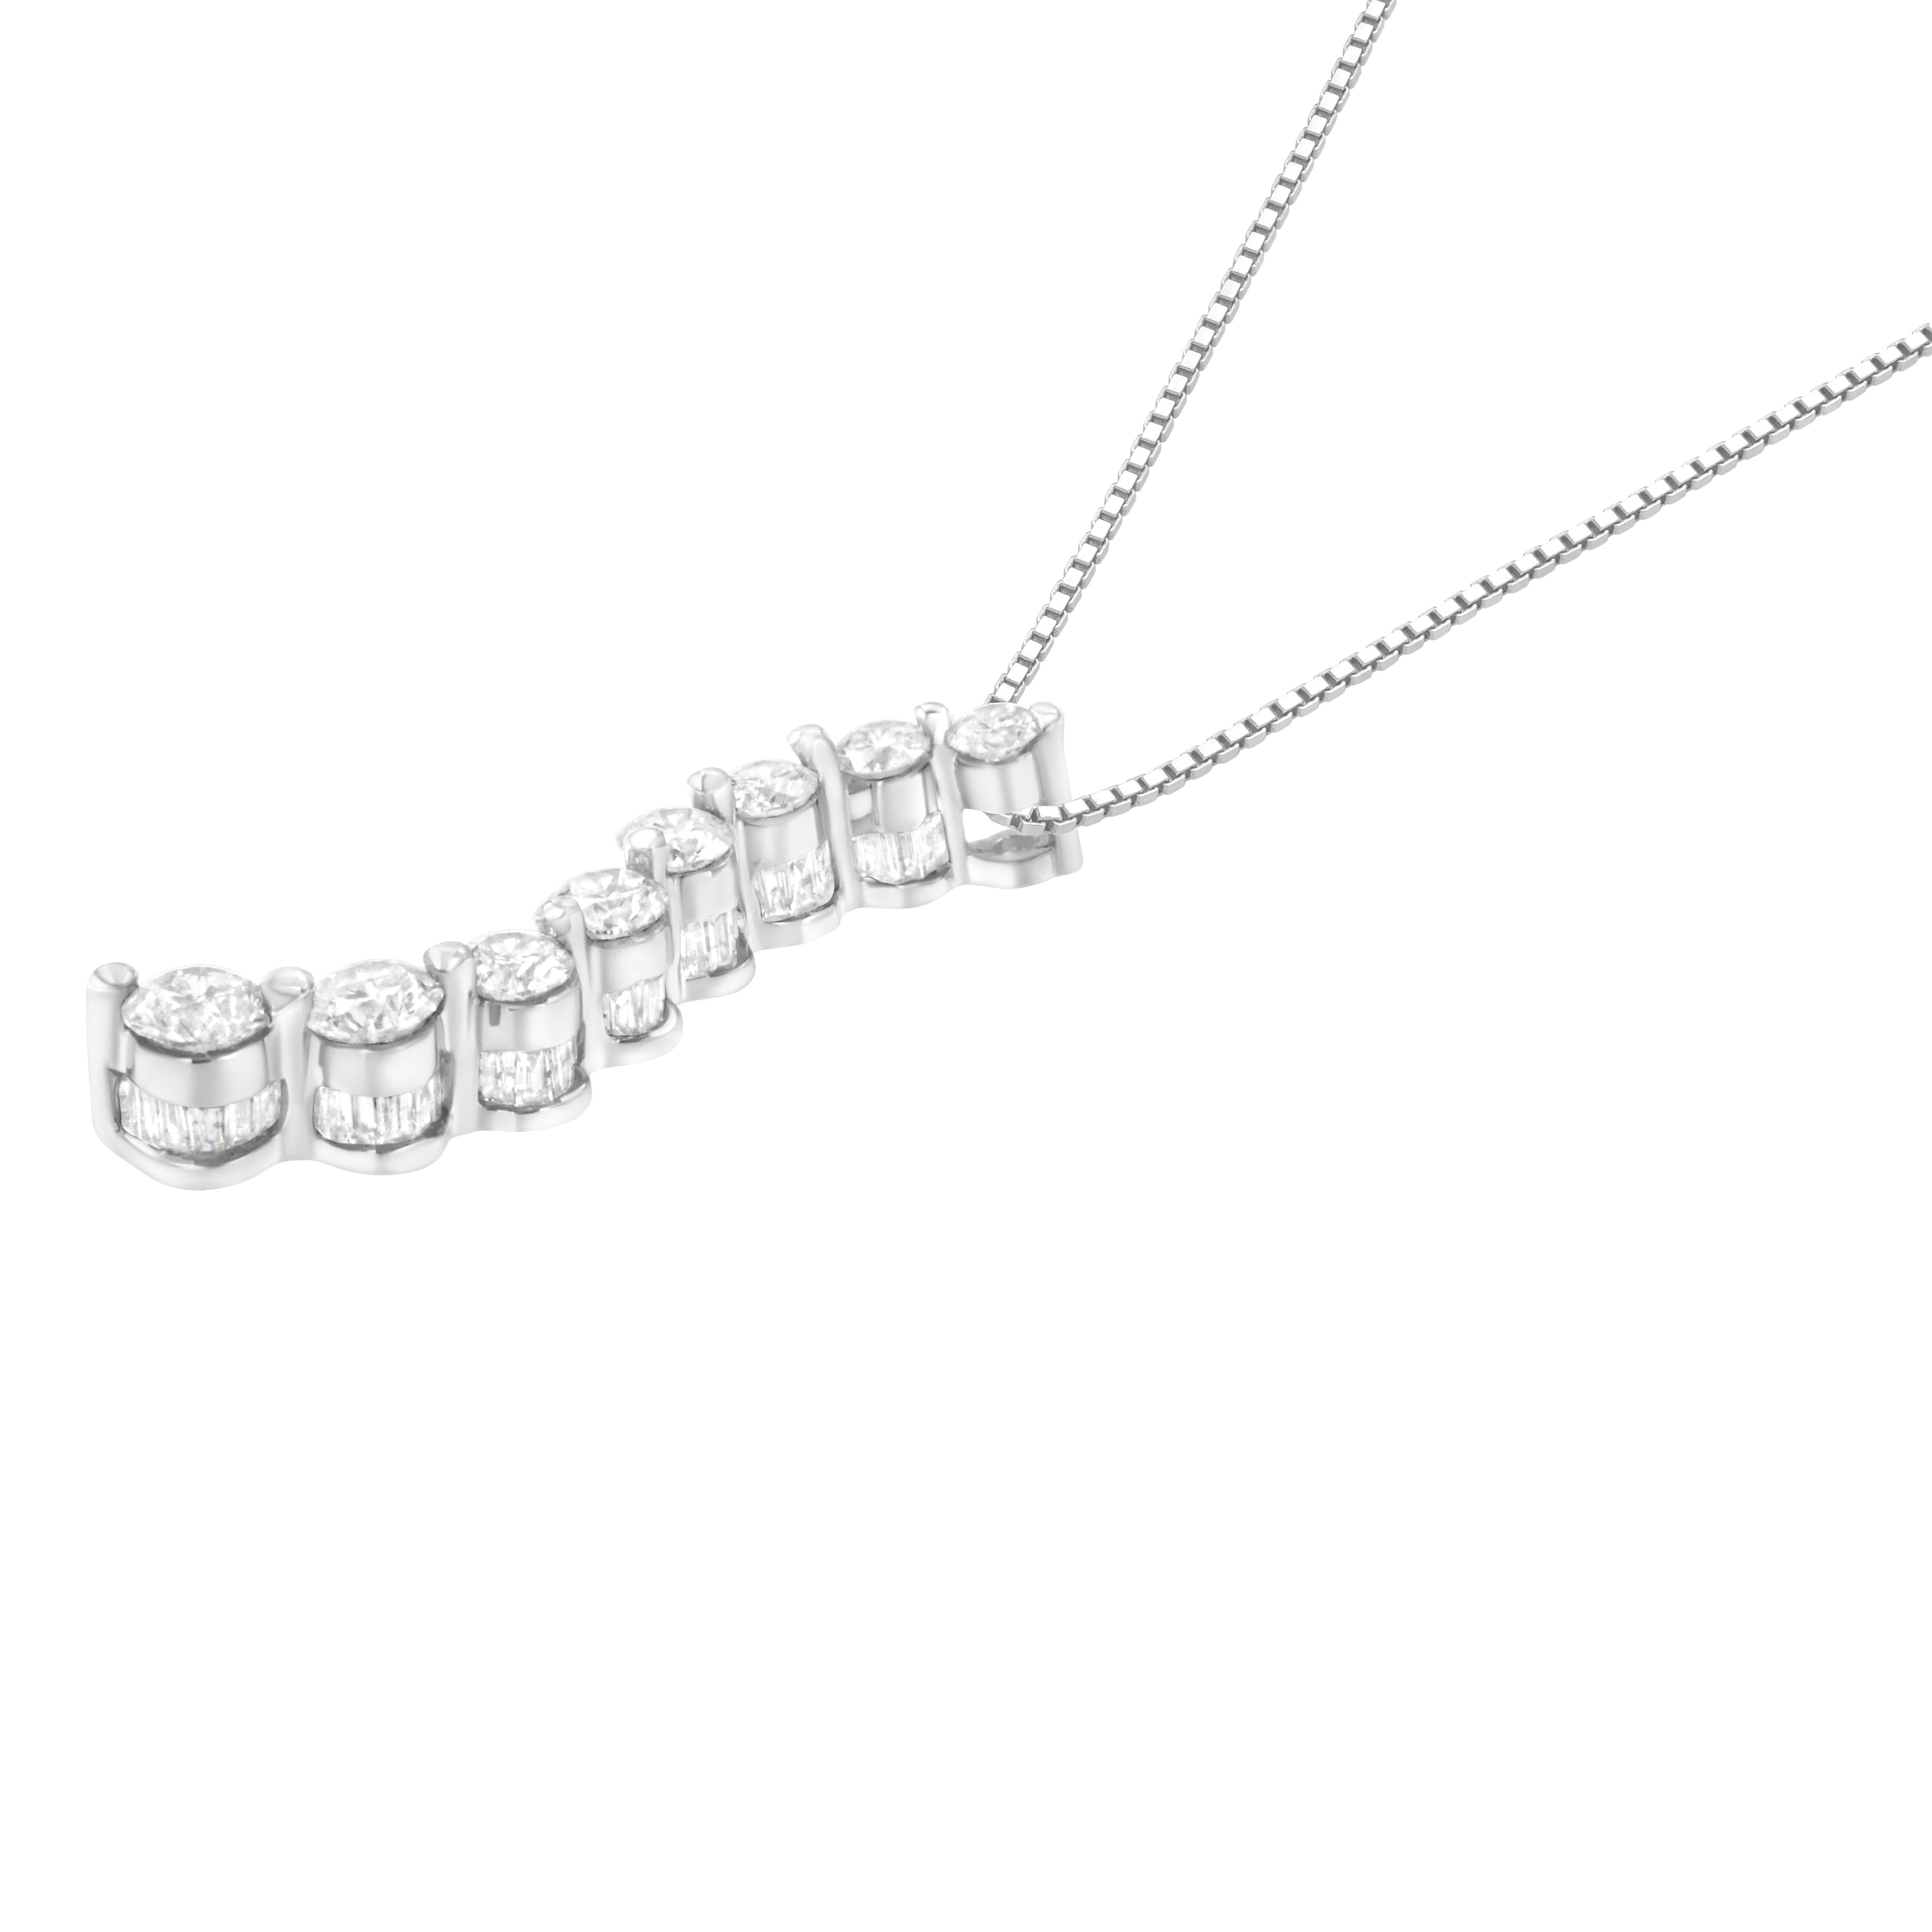 Modern AGS Certified 14K White Gold 3.0 Carat Diamond Journey Pendant Necklace For Sale